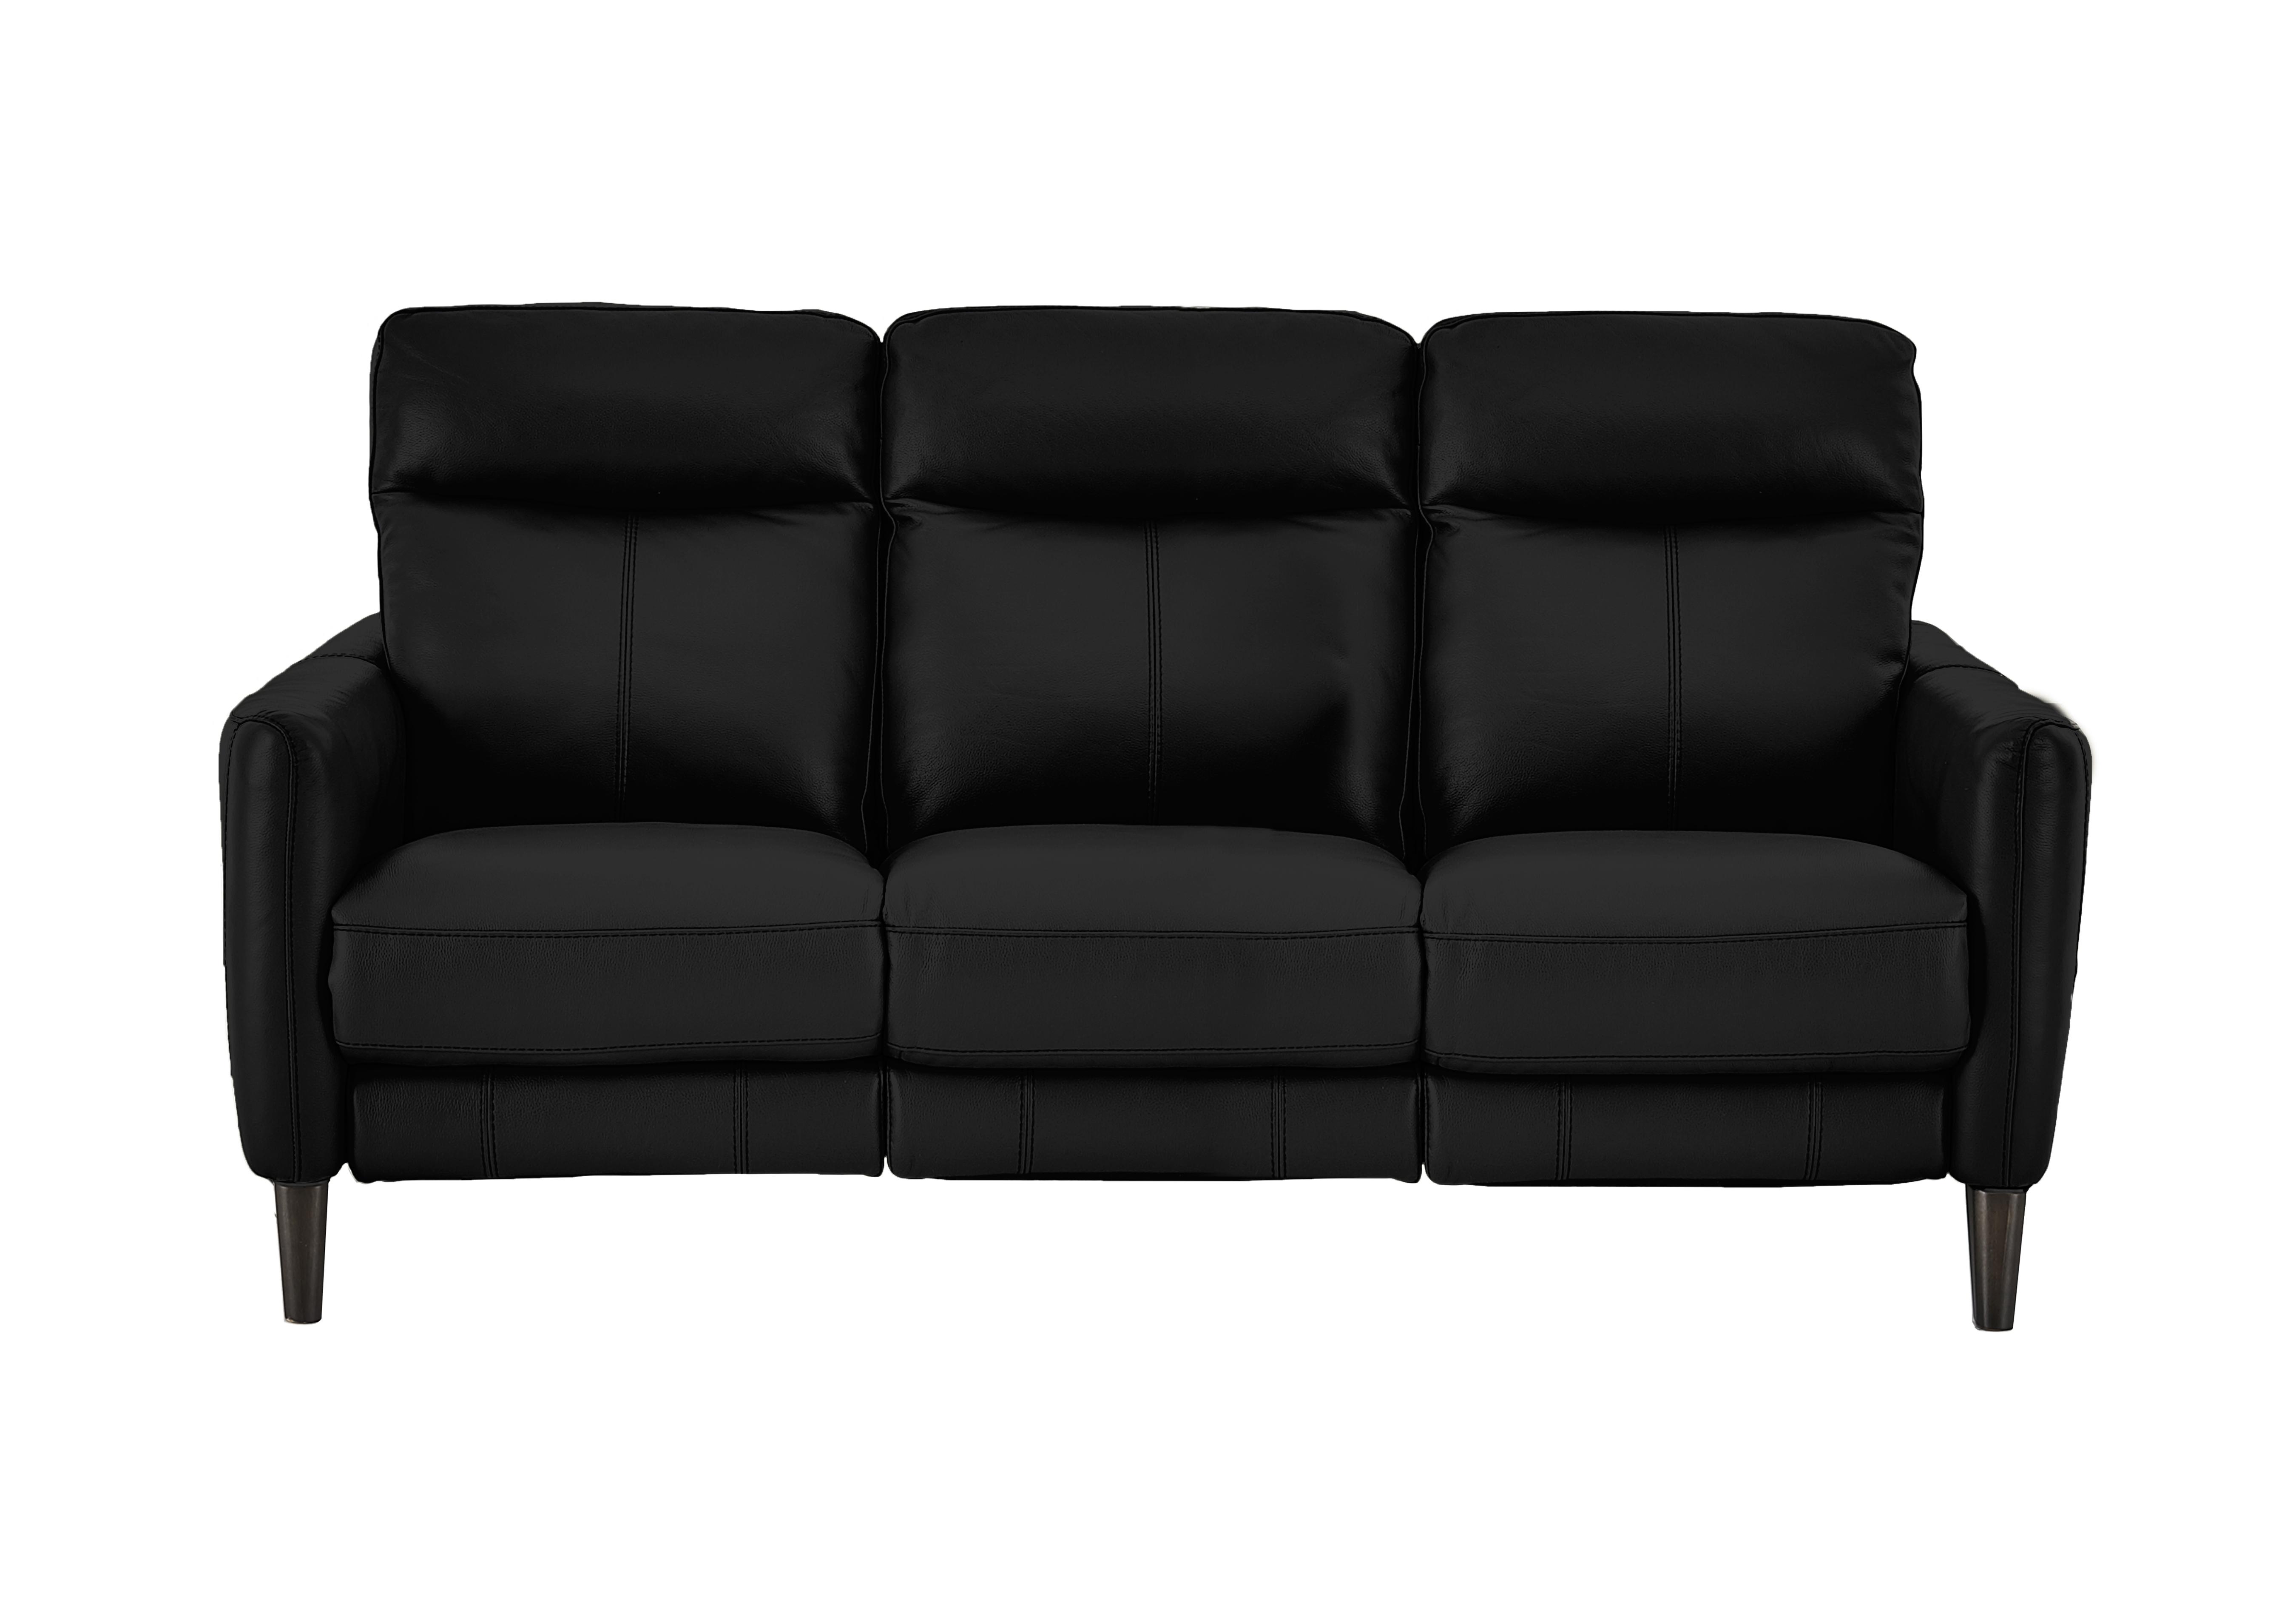 Compact Collection Petit 3 Seater Leather Sofa in Bv-3500 Classic Black on Furniture Village